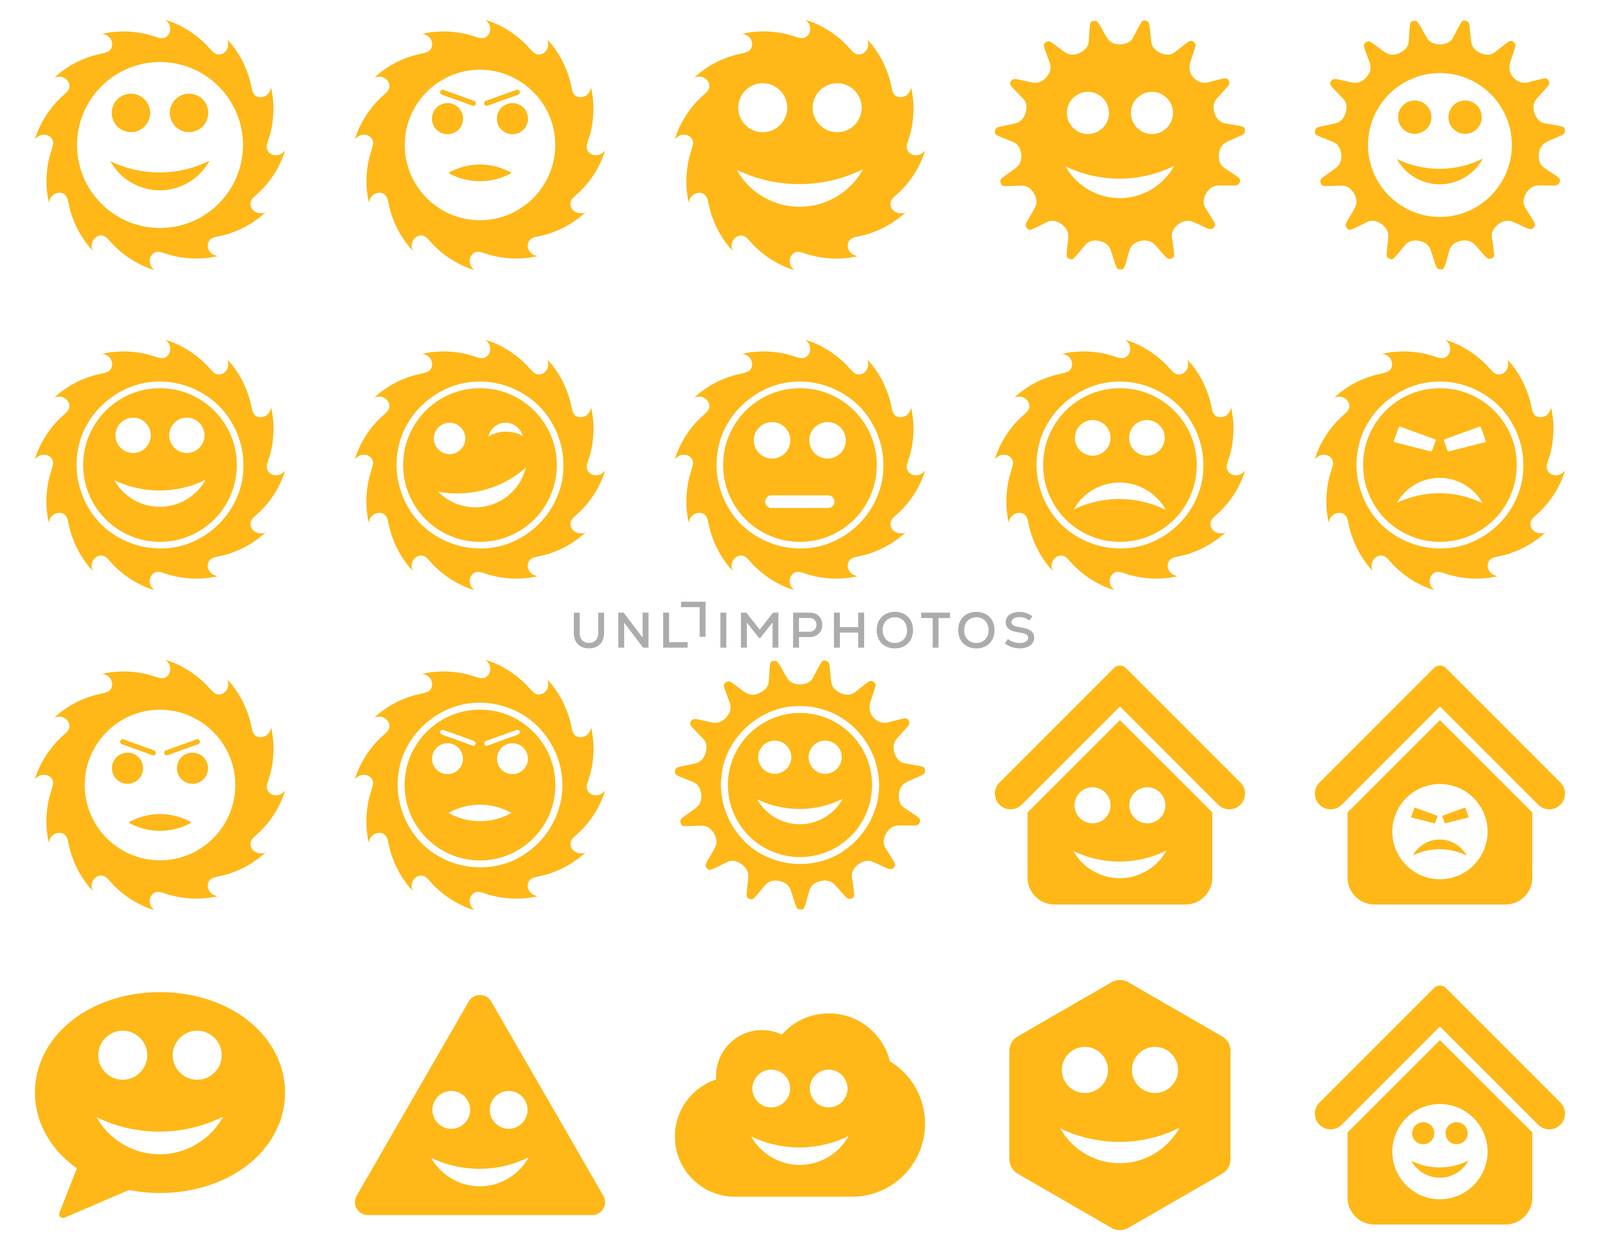 Tools, gears, smiles, emotions icons by ahasoft